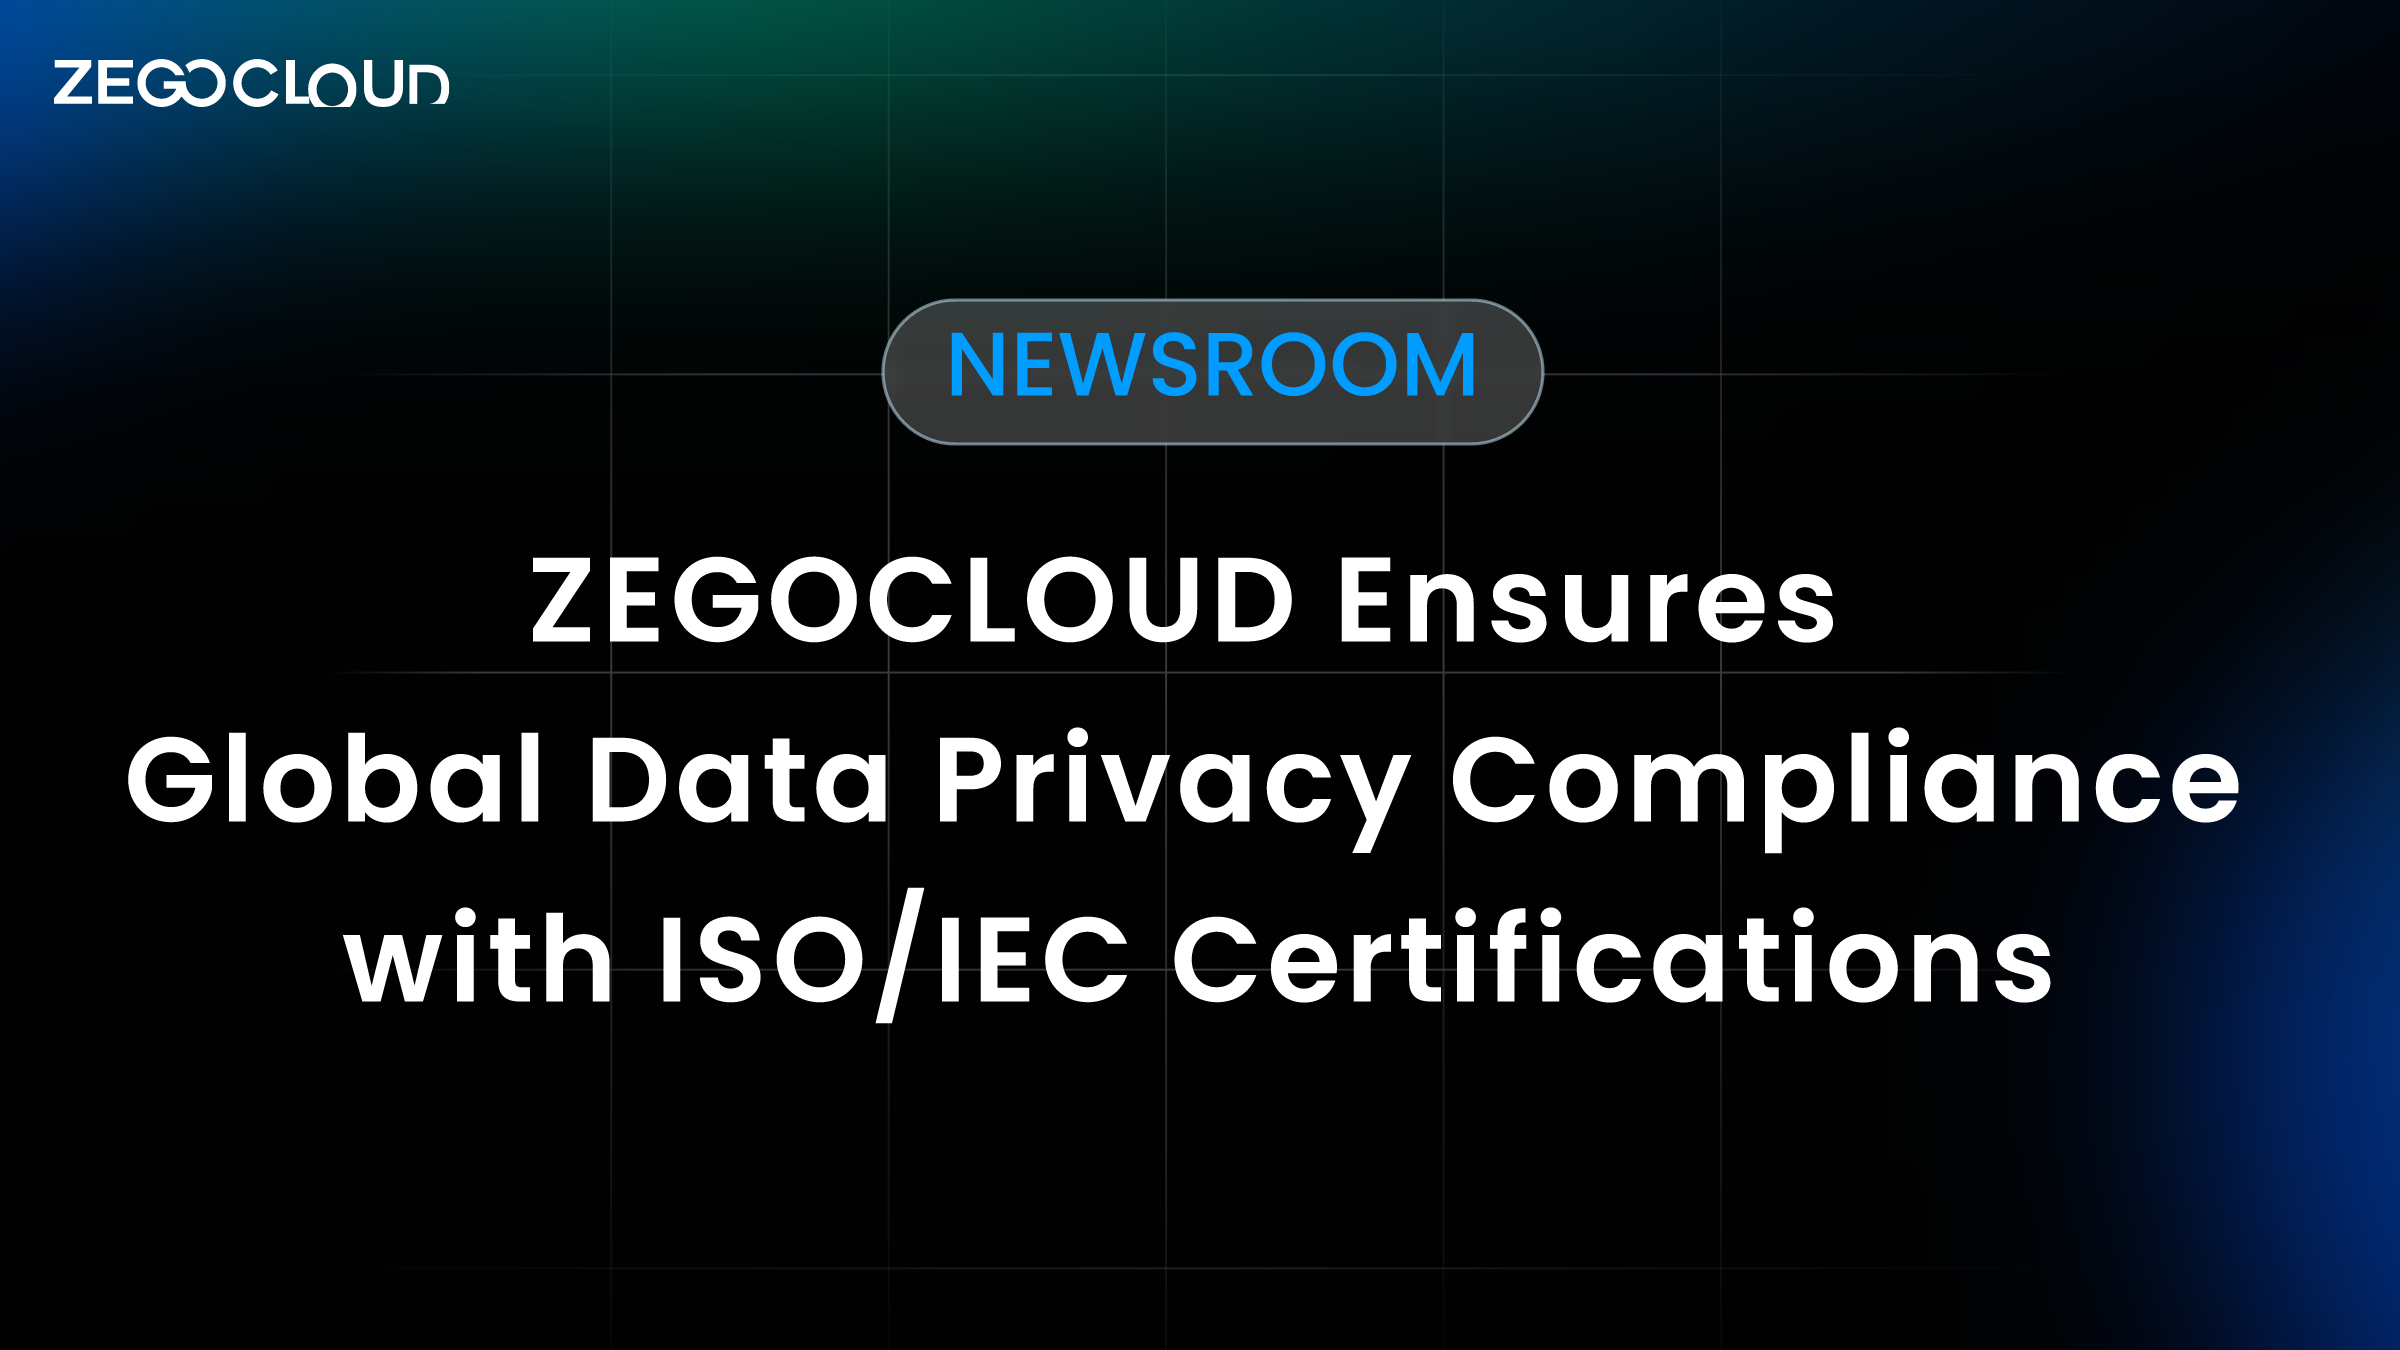 ZEGOCLOUD Ensures Global Data Privacy Compliance with ISO/IEC Certifications